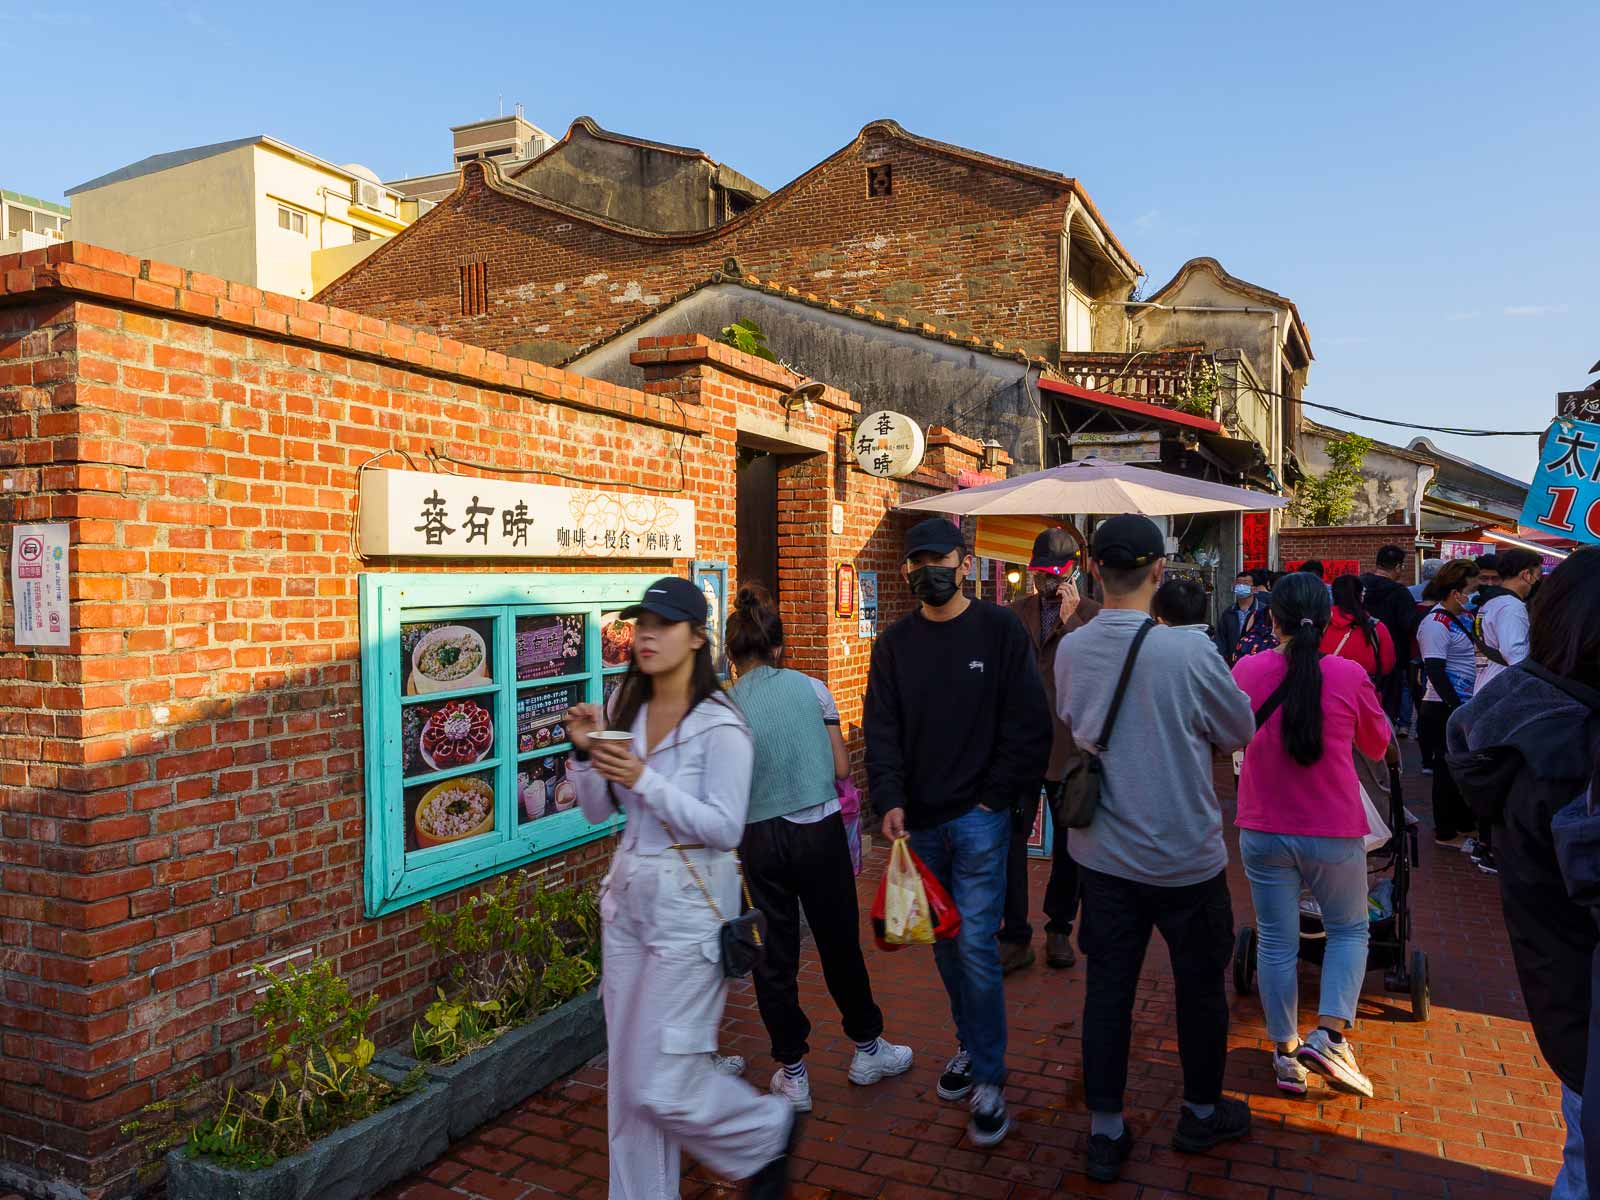 Tourists walk down a red-brick alley in Lukang.